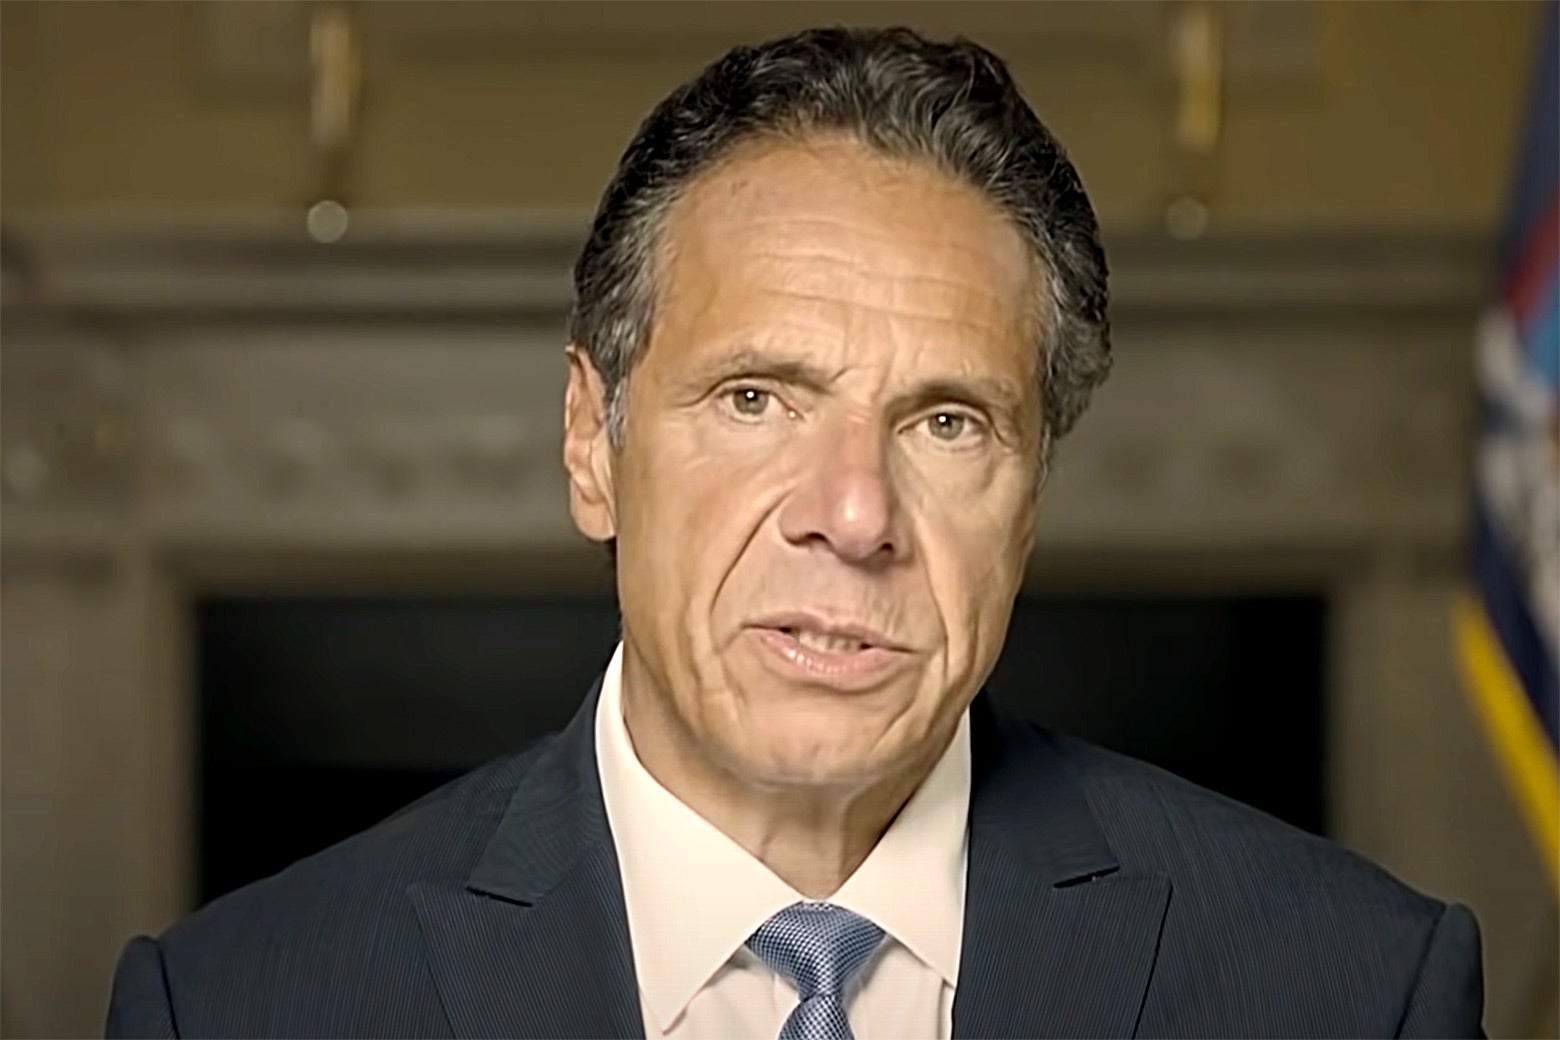 Cuomo looking grim while giving a statement